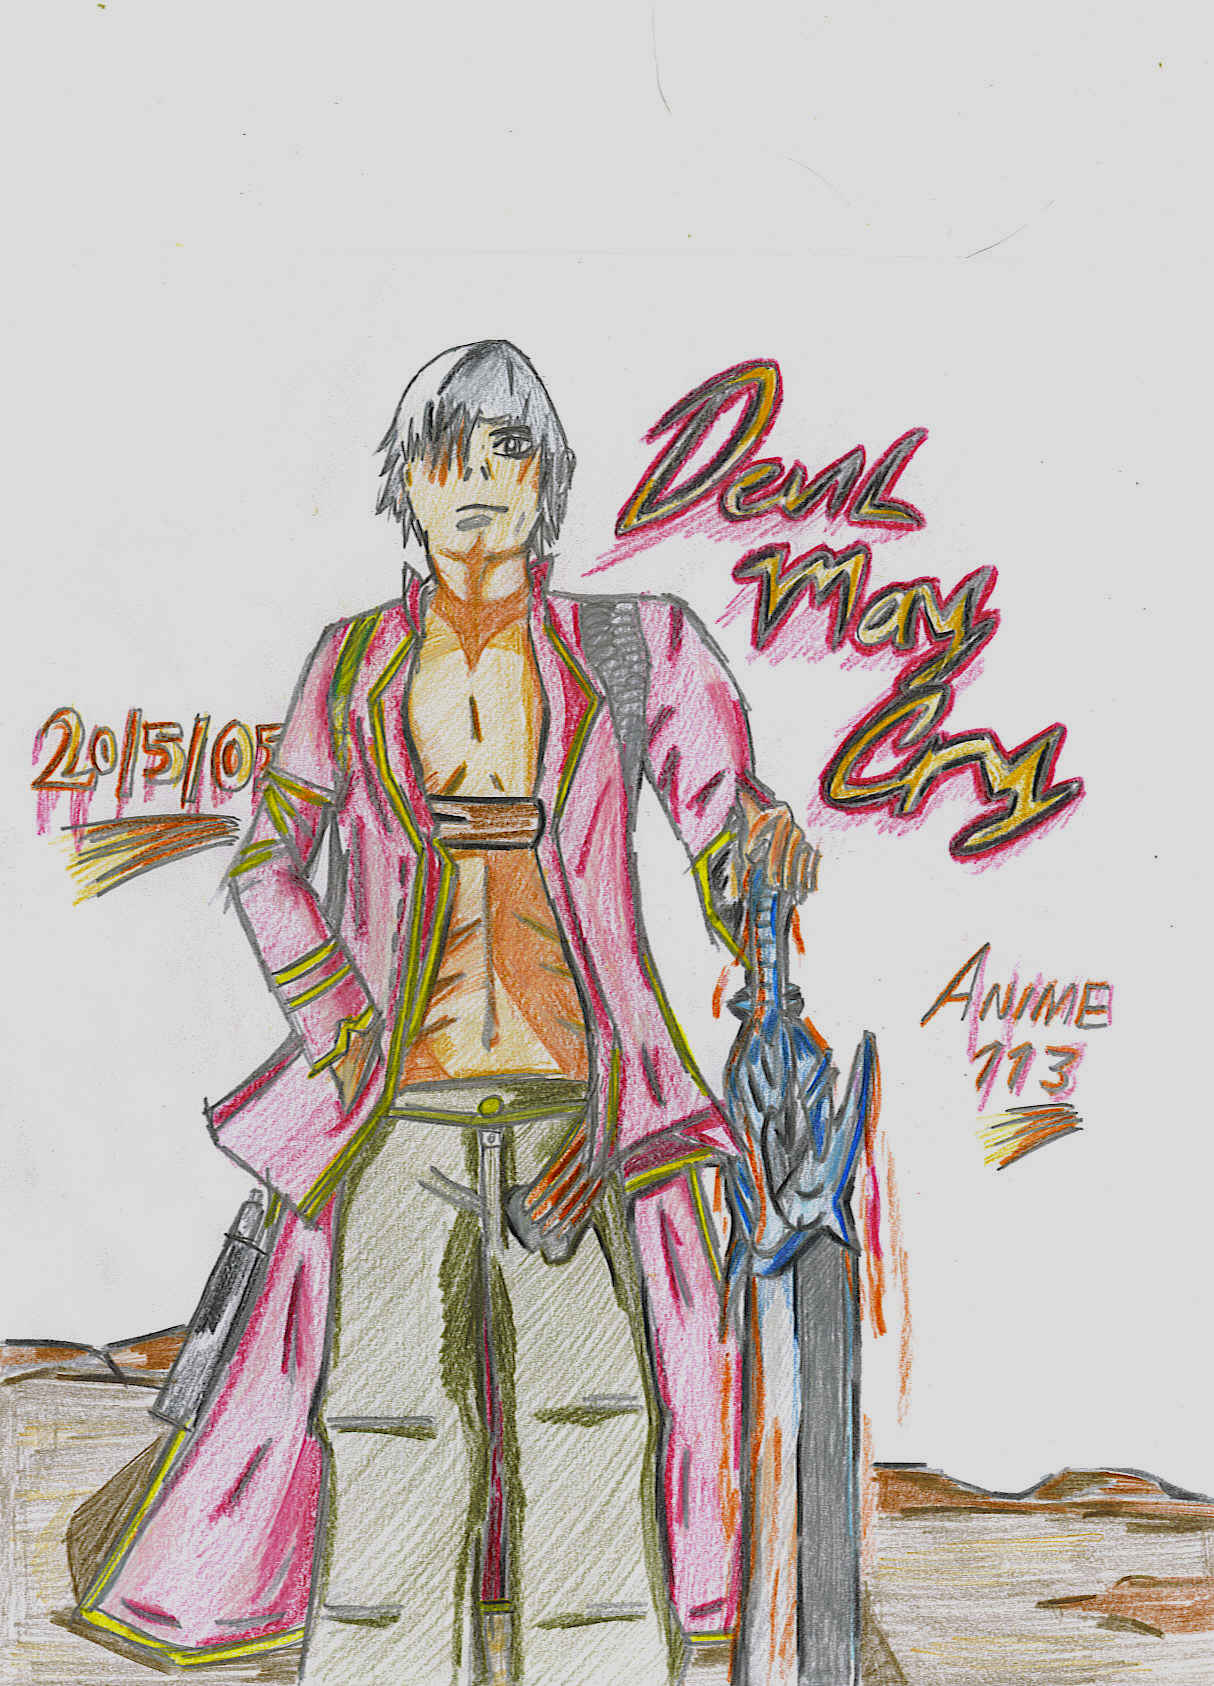 my good picture of dante by anime113